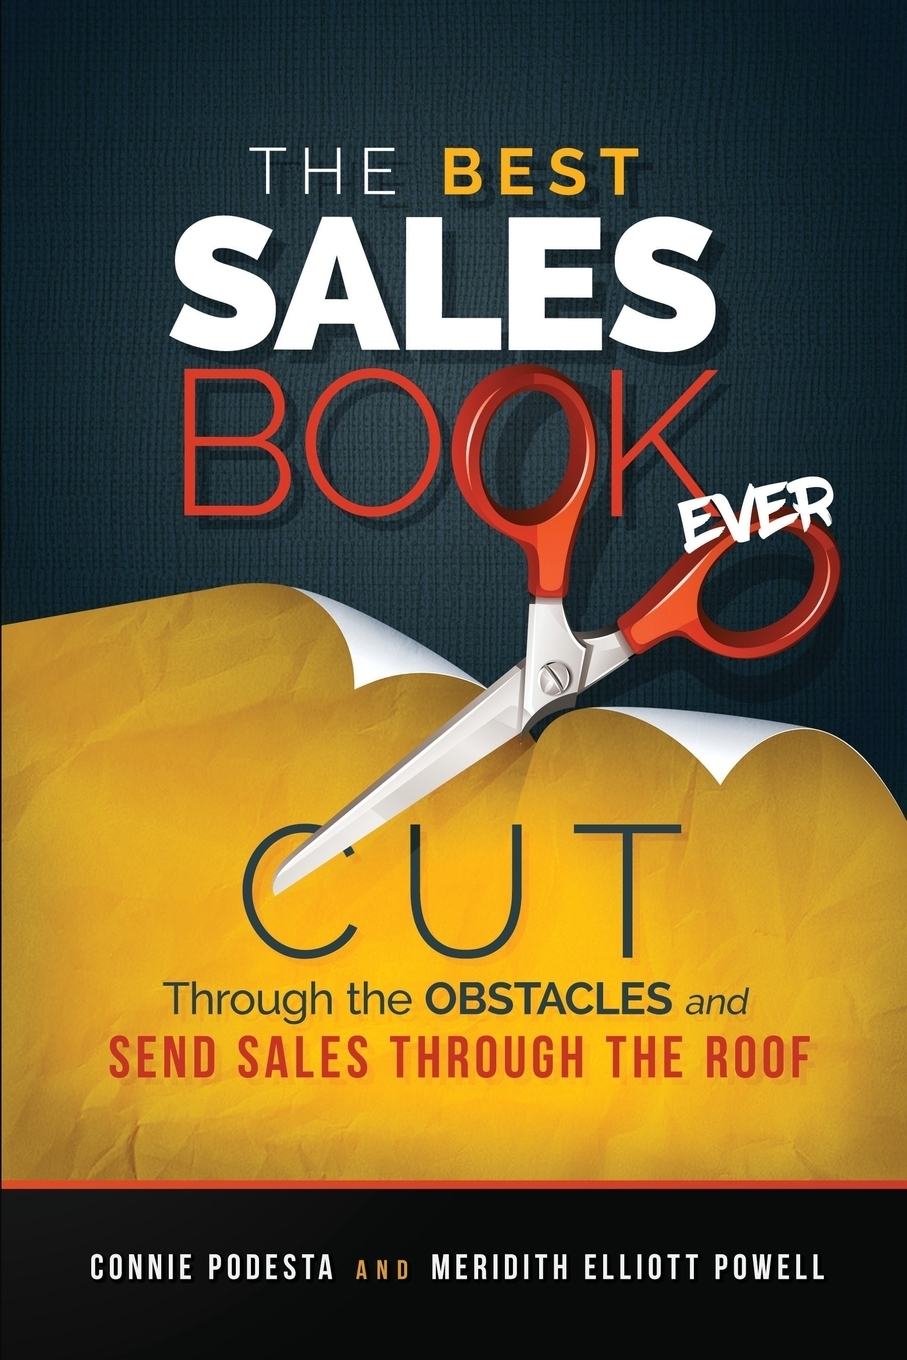 Sales book. Best sales. The sales book. 50 Of a leader book. Book sales poster ideas.